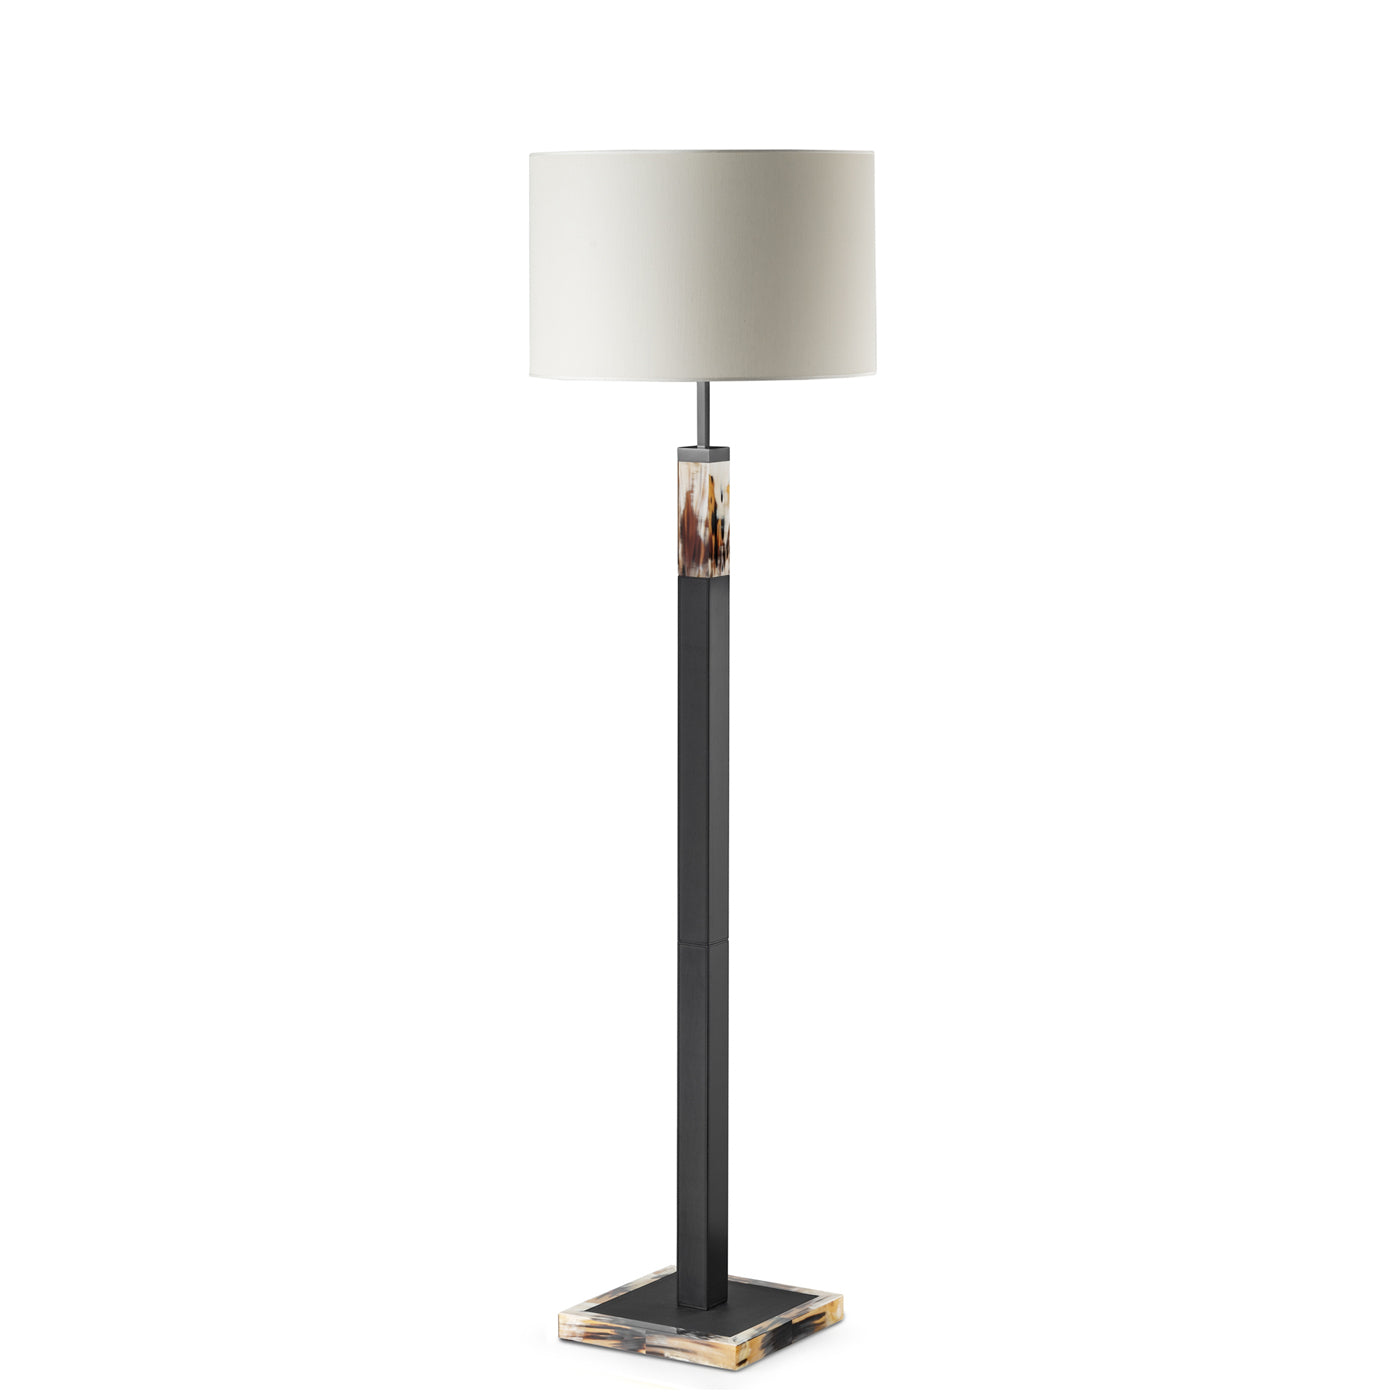 Alma Floor Lamp: Dark Horn and Tosca Leather, Gunmetal Brass Detailing, Ivory Shantung Lampshade